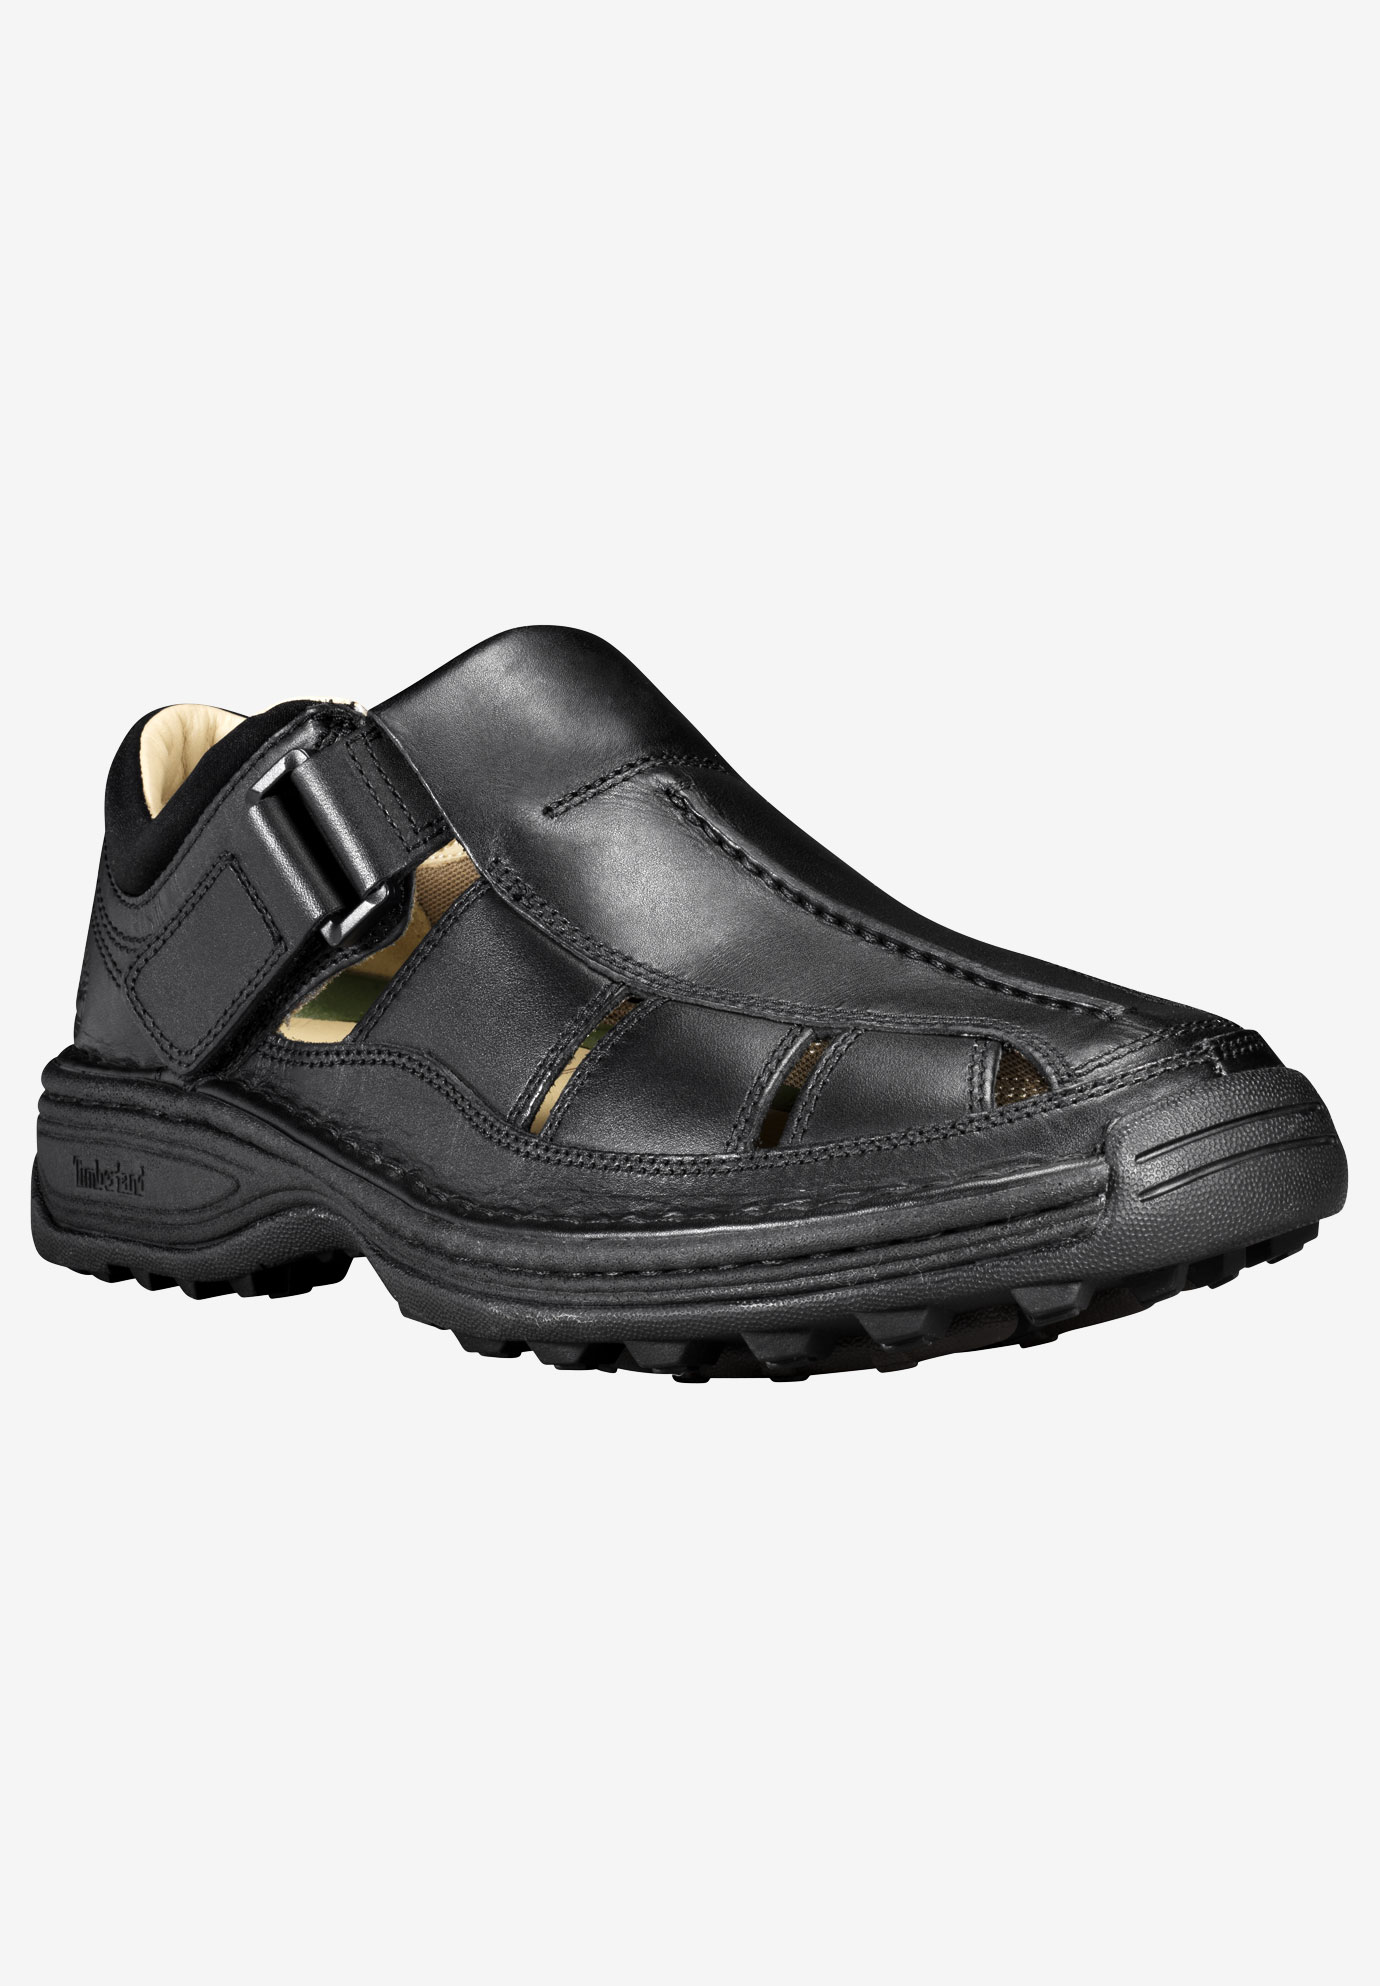 Timberland® Altamont Fisherman Sandals | Fullbeauty Outlet